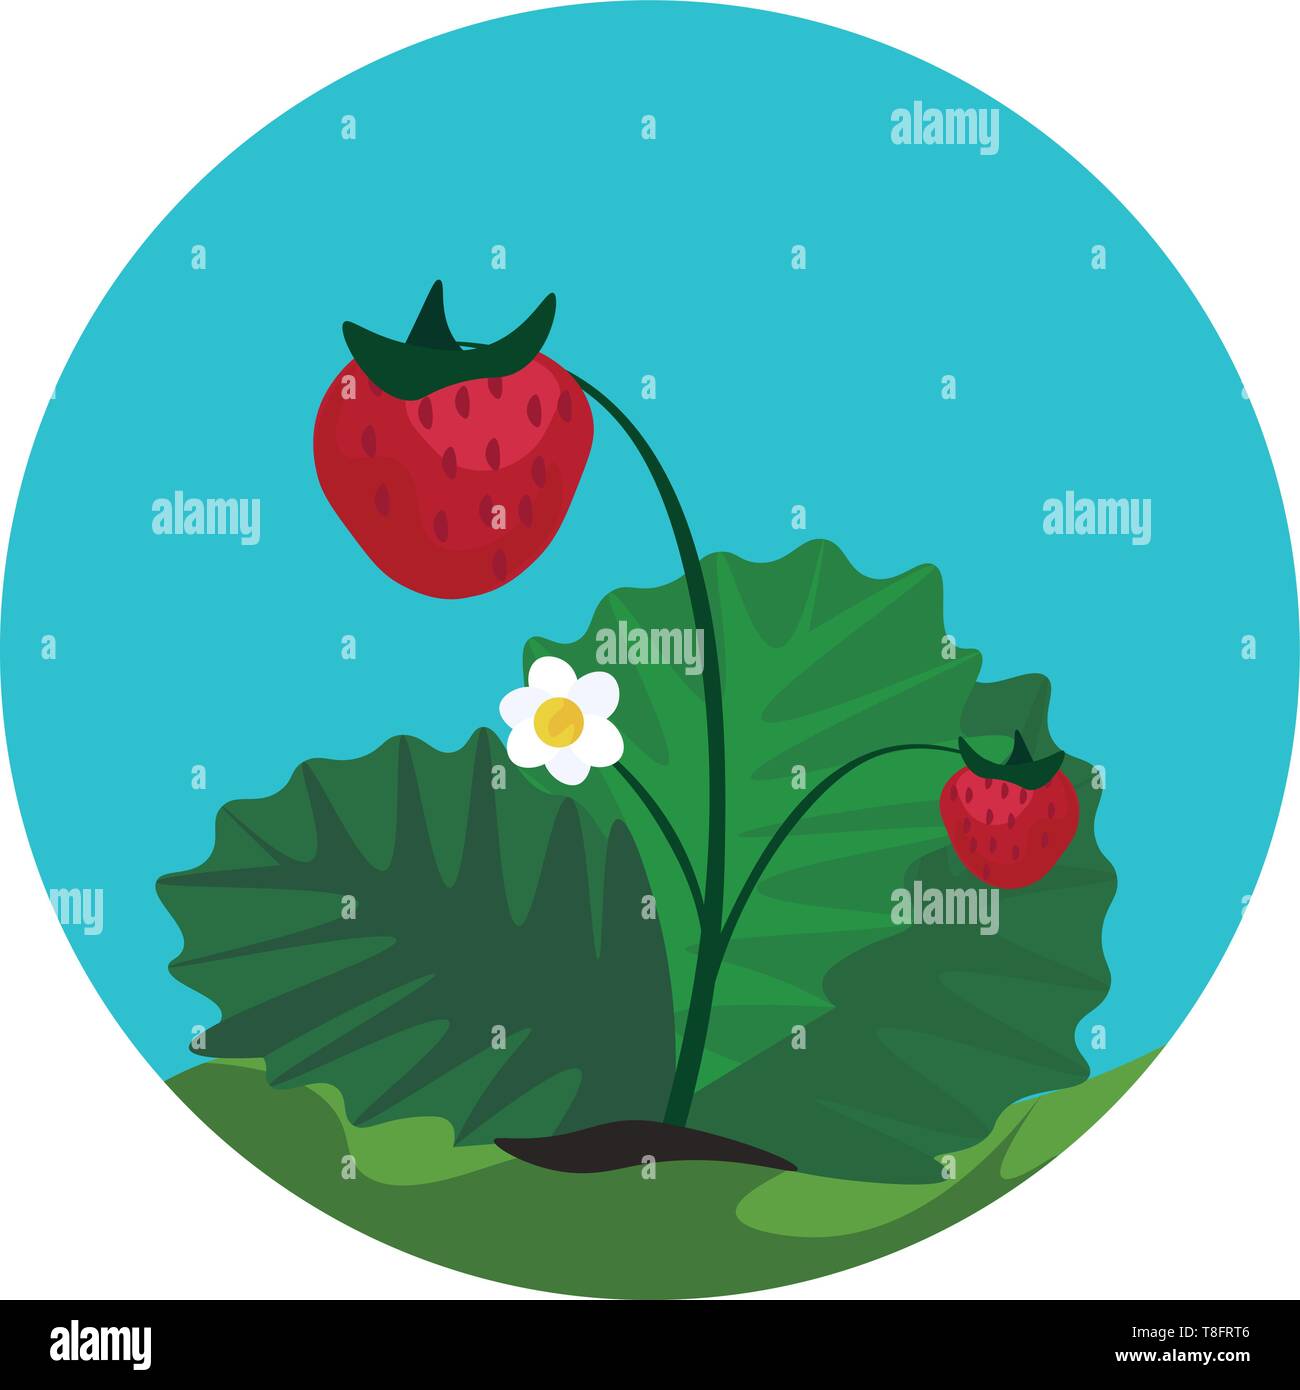 Portrait of the strawberry plant with flat green leaves and a flower with white floret and yellow disc isolated blue background viewed from the front, Stock Vector